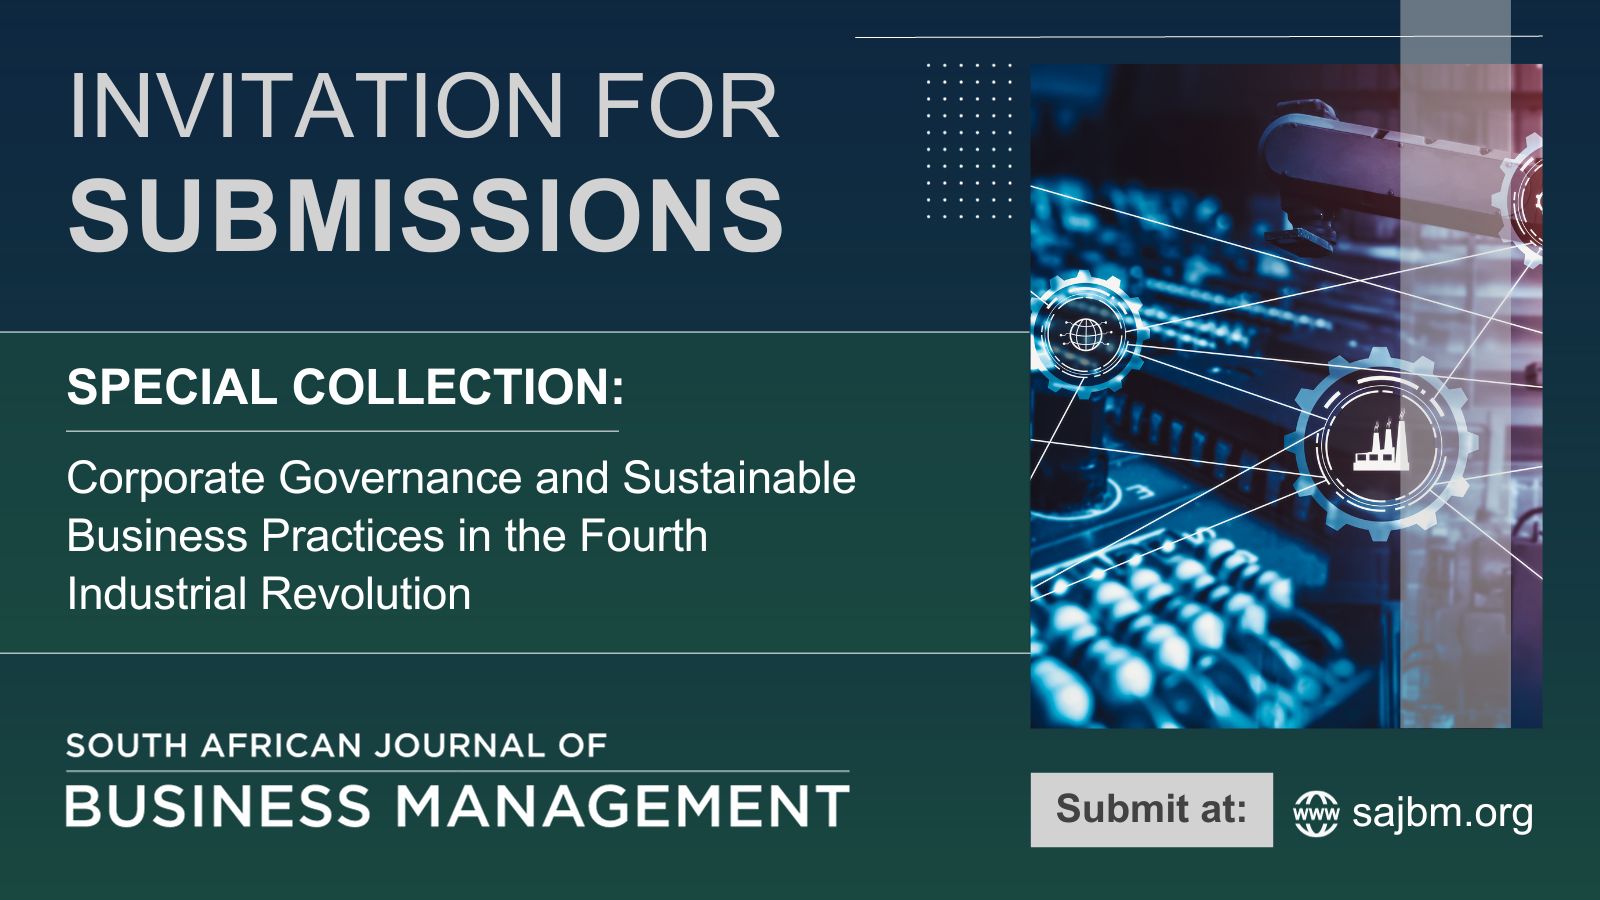 Invitation for submissions: Special Collection in South African Journal of Business Management